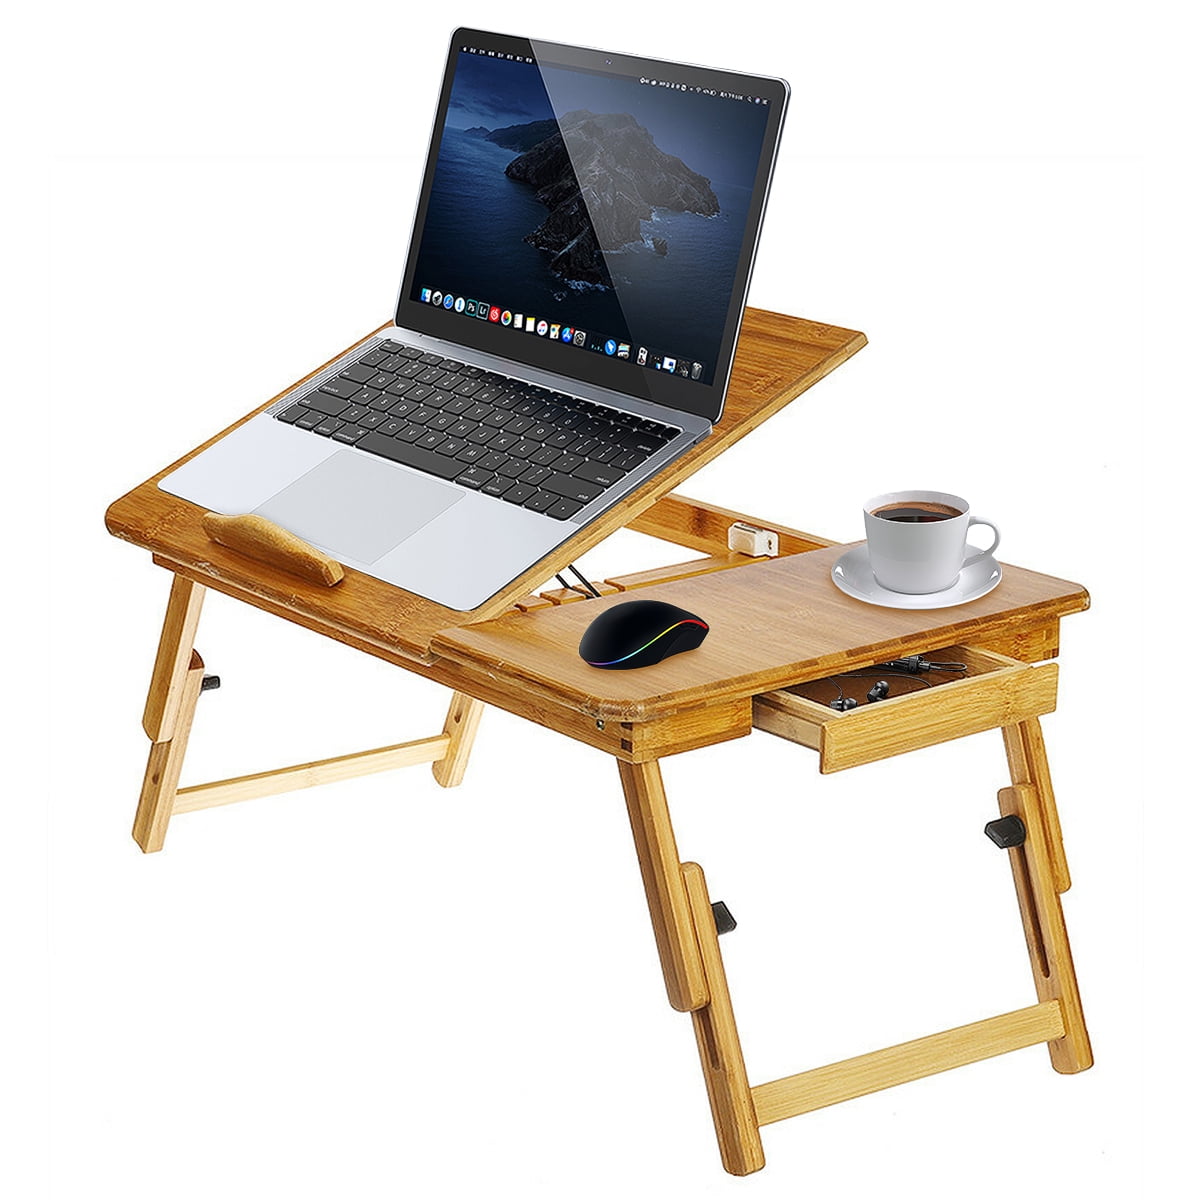 Portable Laptop Desk Folding Foldable Lap Tray Bed Adjustable Table Stand Bamboo 